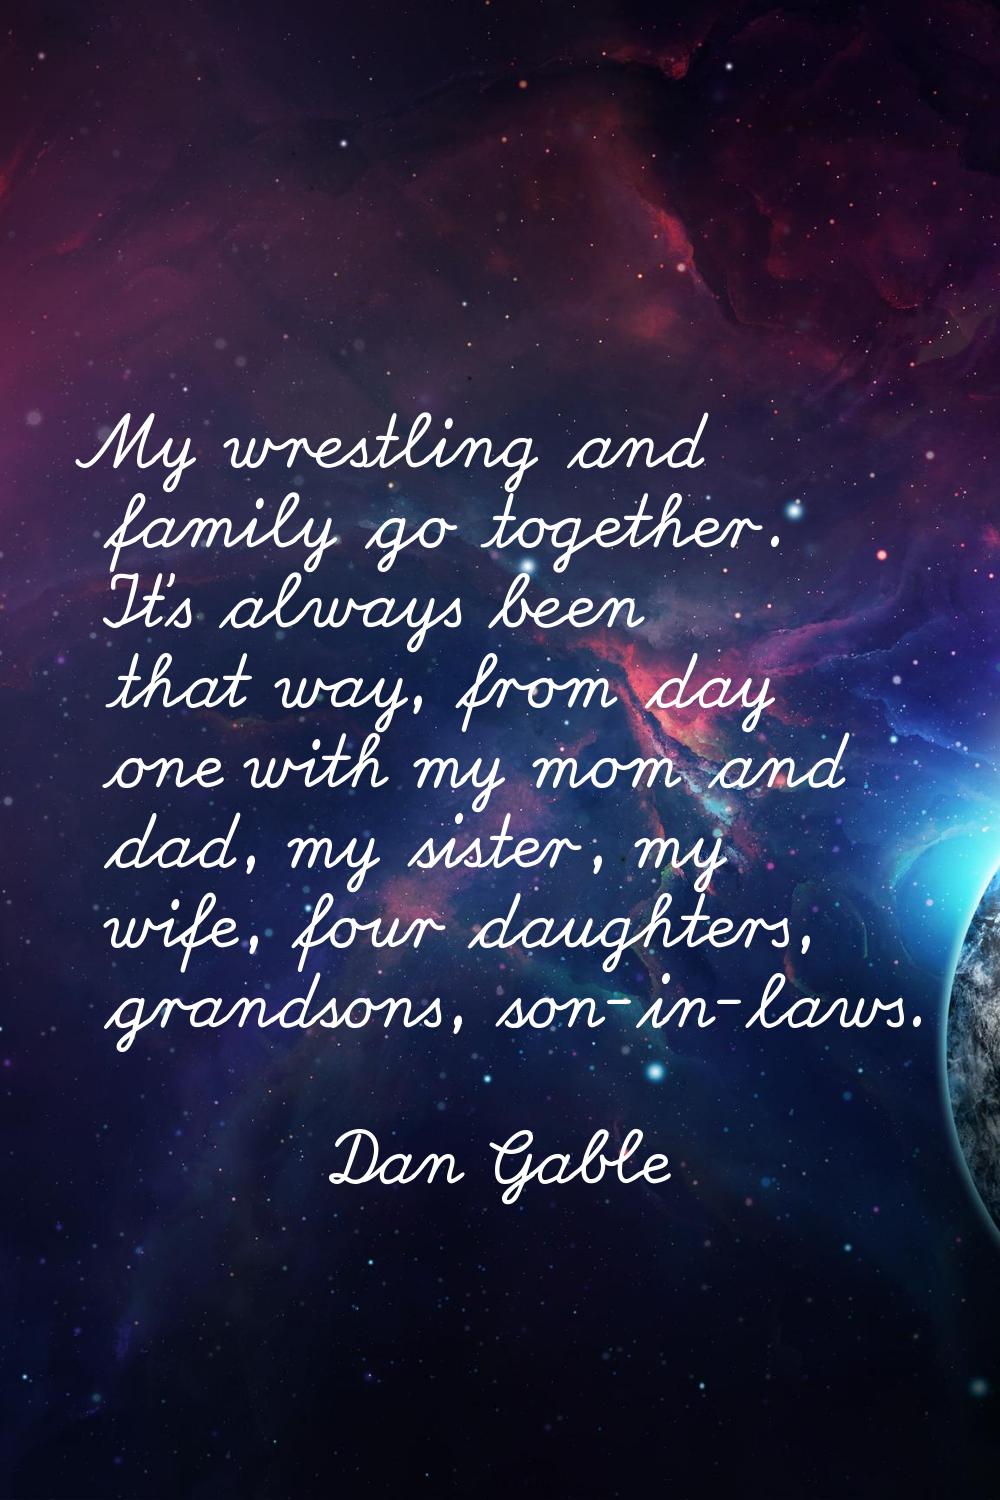 My wrestling and family go together. It's always been that way, from day one with my mom and dad, m